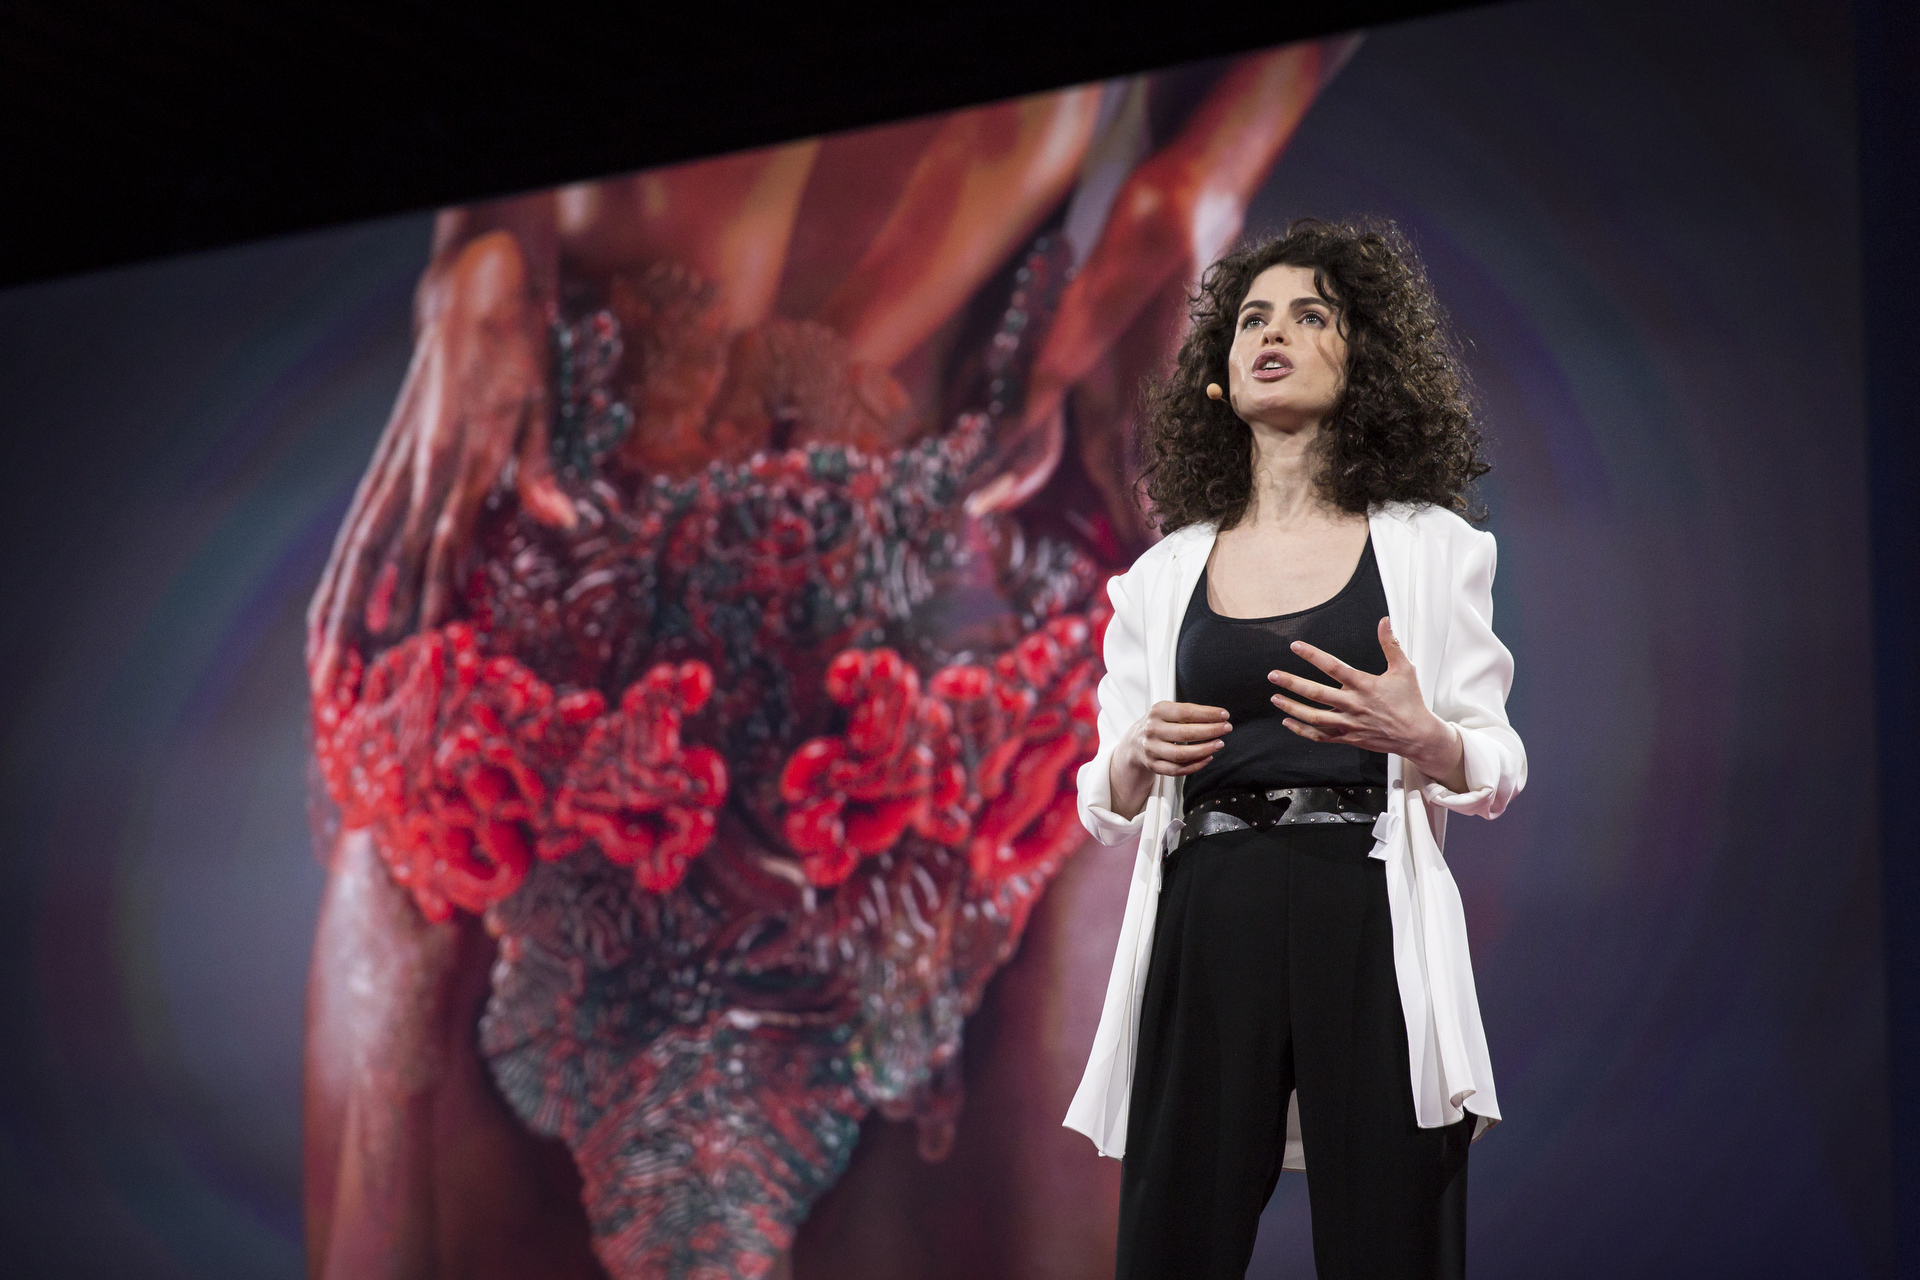 Neri Oxman speaks at TED2015 - Truth and Dare, Session 10, March 16-20, 2015, Vancouver Convention Center, Vancouver, Canada. Photo: Bret Hartman/TED